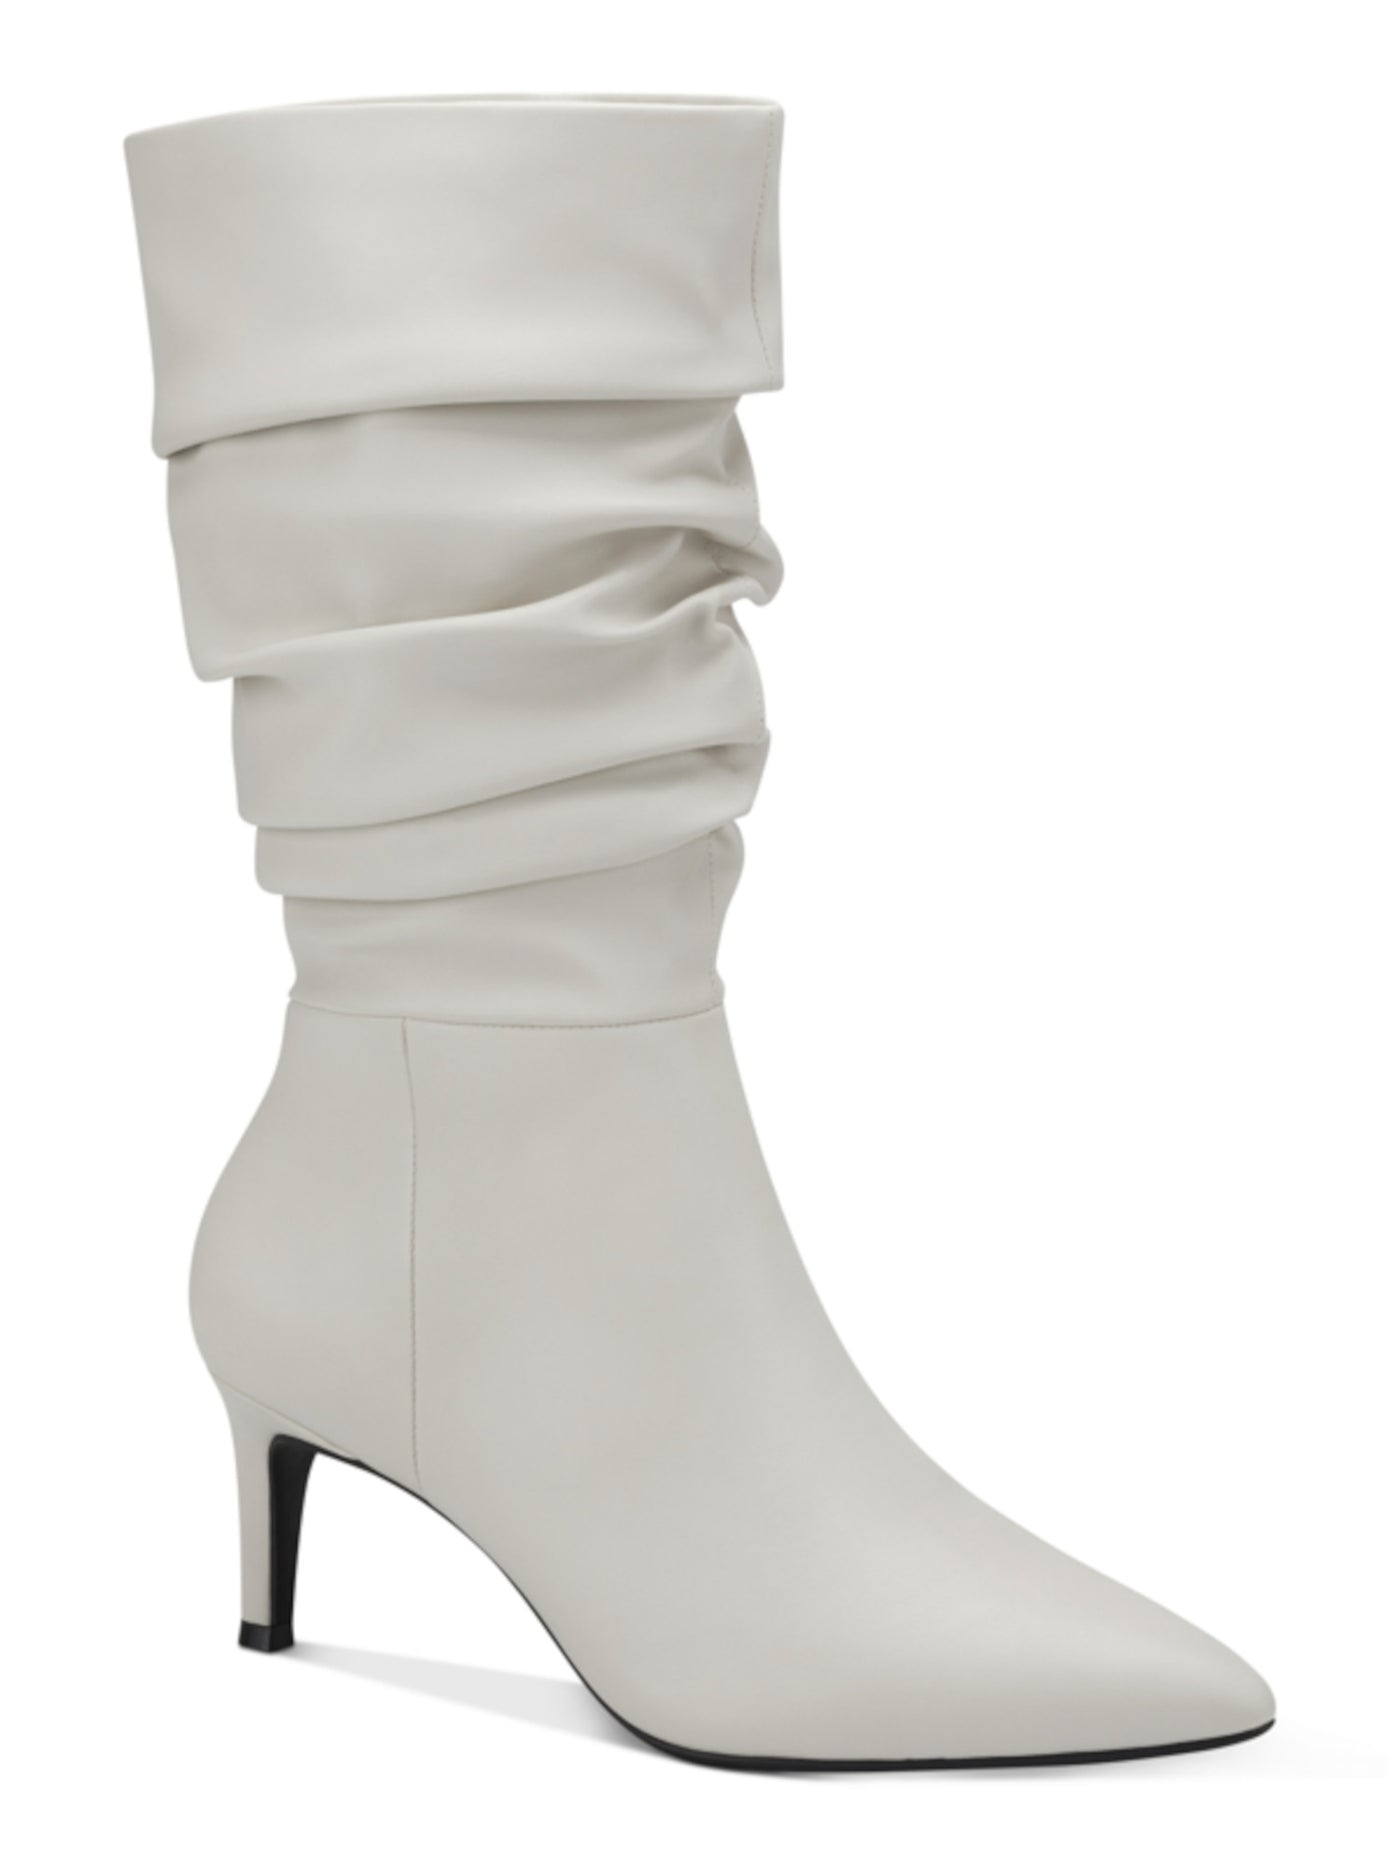 ALFANI Womens Ivory Ruched Padded Lissa Pointed Toe Stiletto Zip-Up Dress Slouch Boot 8 M